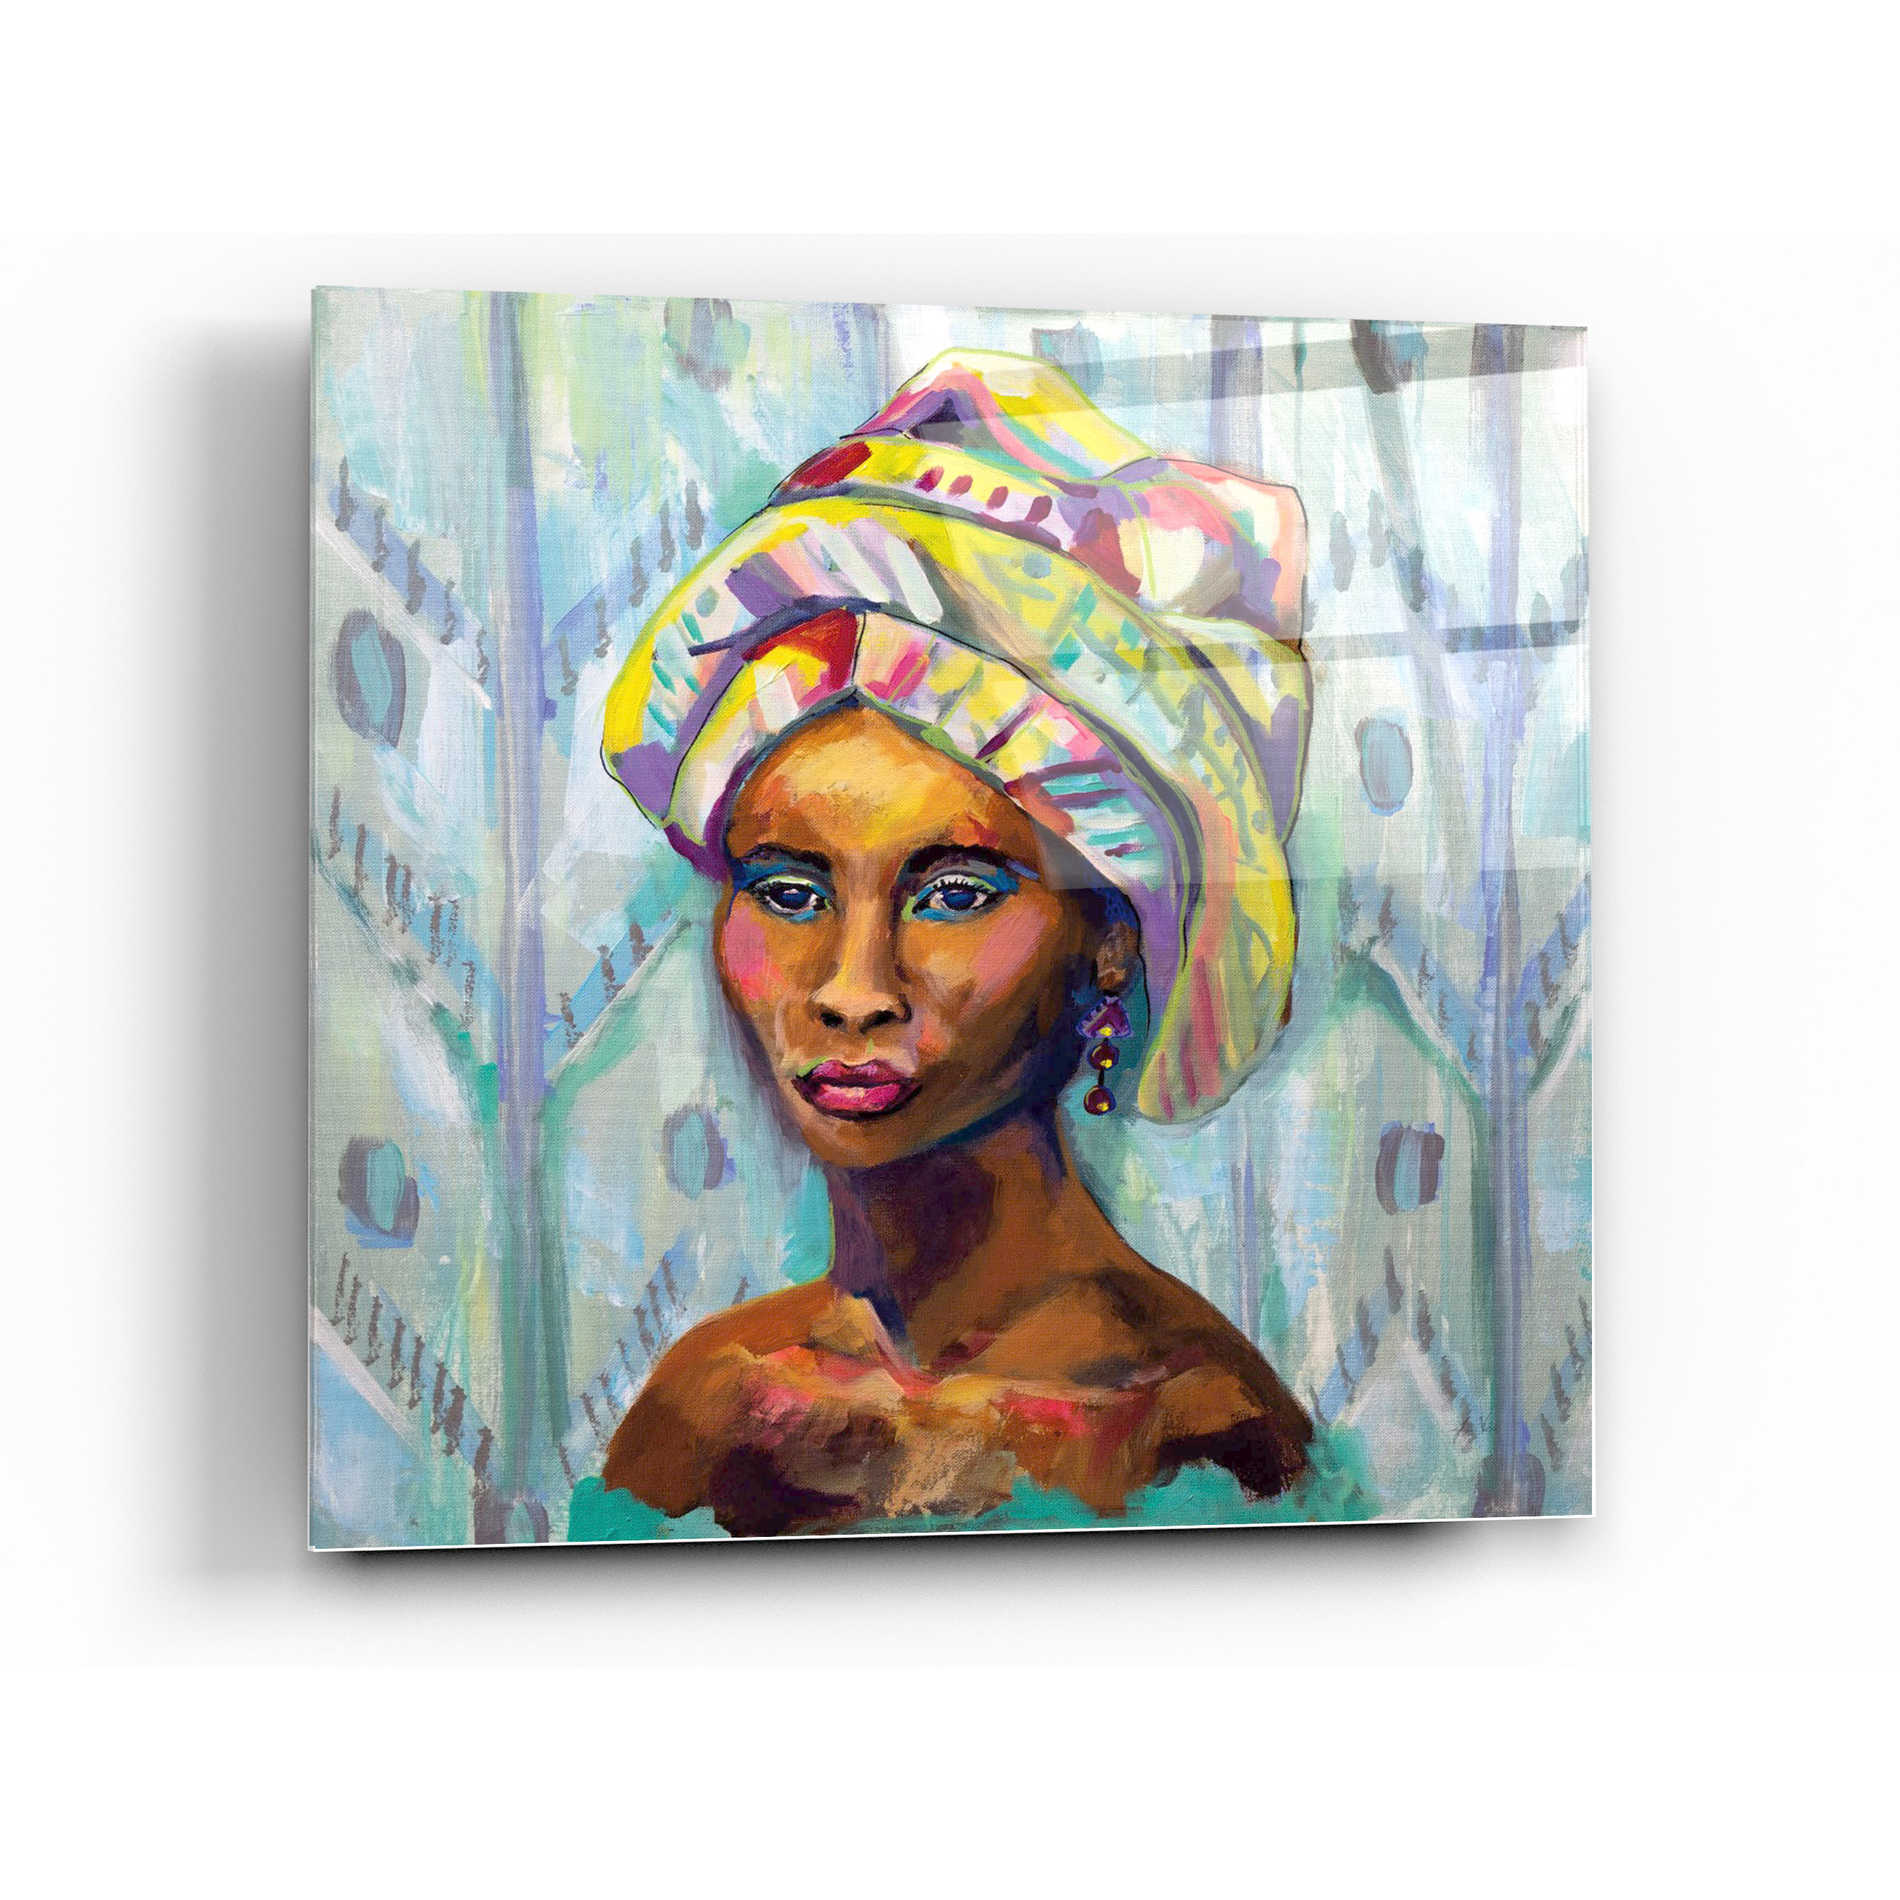 Epic Art 'Queen' by Jeanette Vertentes, Acrylic Glass Wall Art,12x12